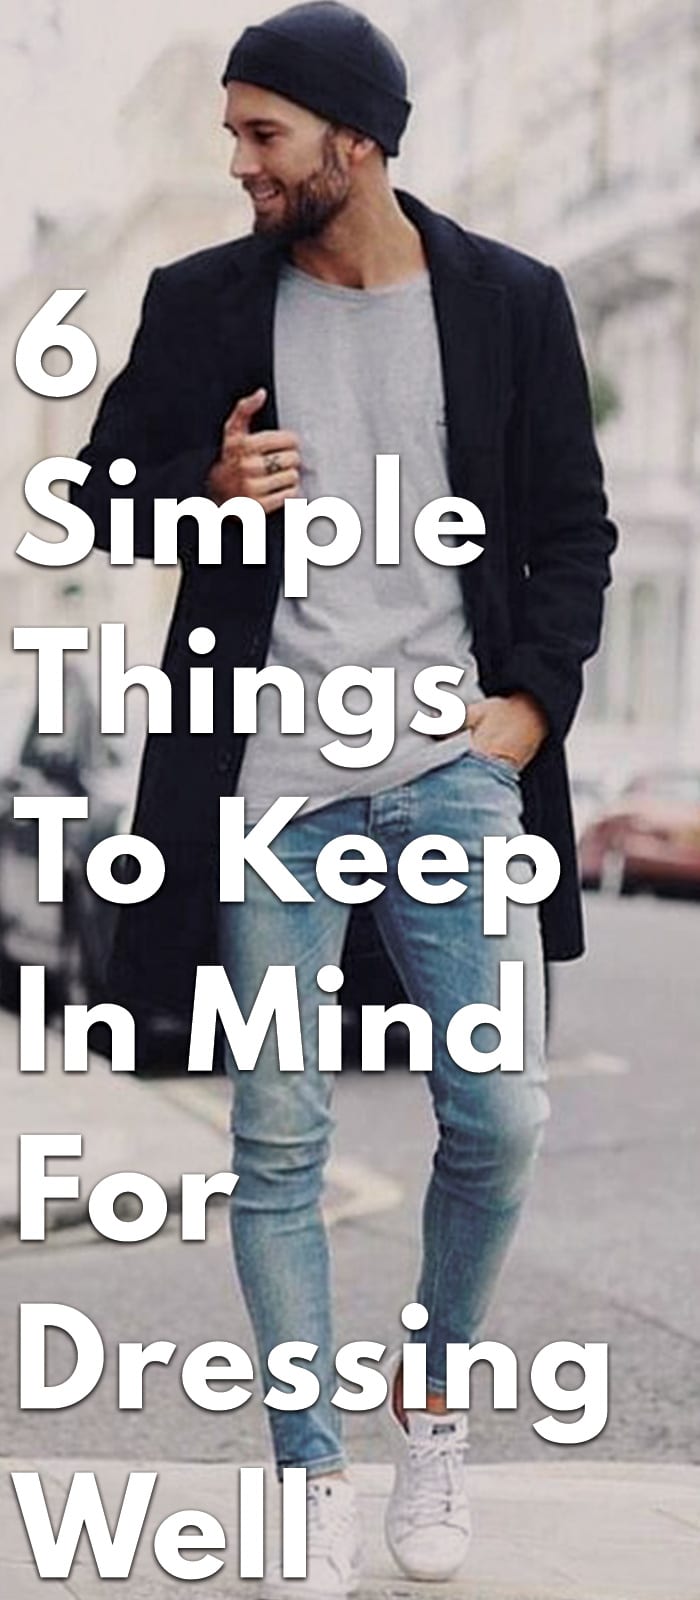 6-Simple-Things-to-Keep-in-Mind-for-Dressing-Well